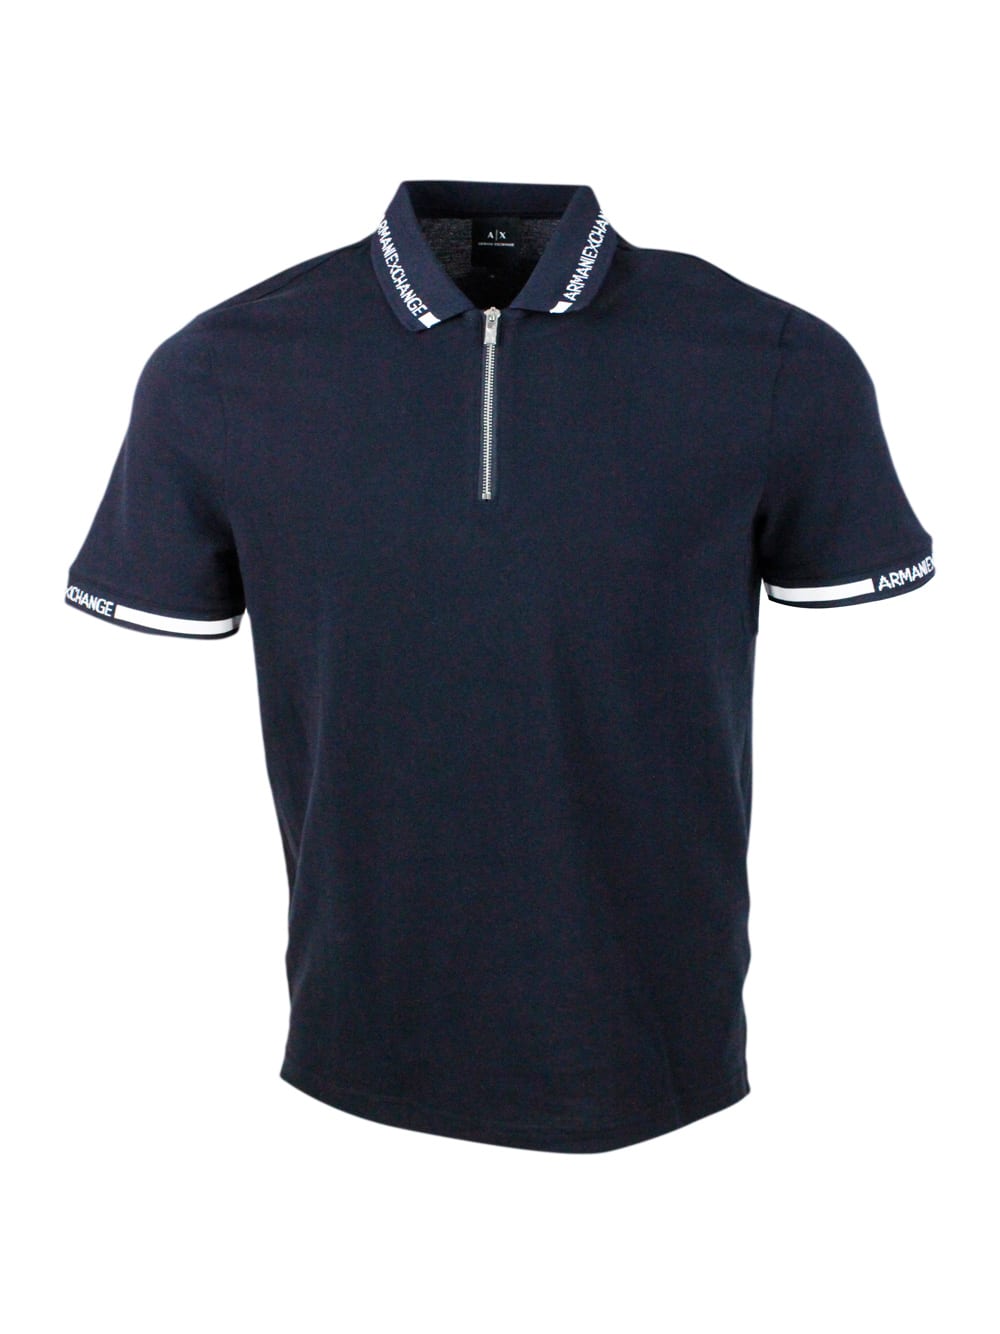 Armani Collezioni Hort-sleeved Pique Cotton Polo Shirt With Zip Closure And Writing On The Collar In Blu